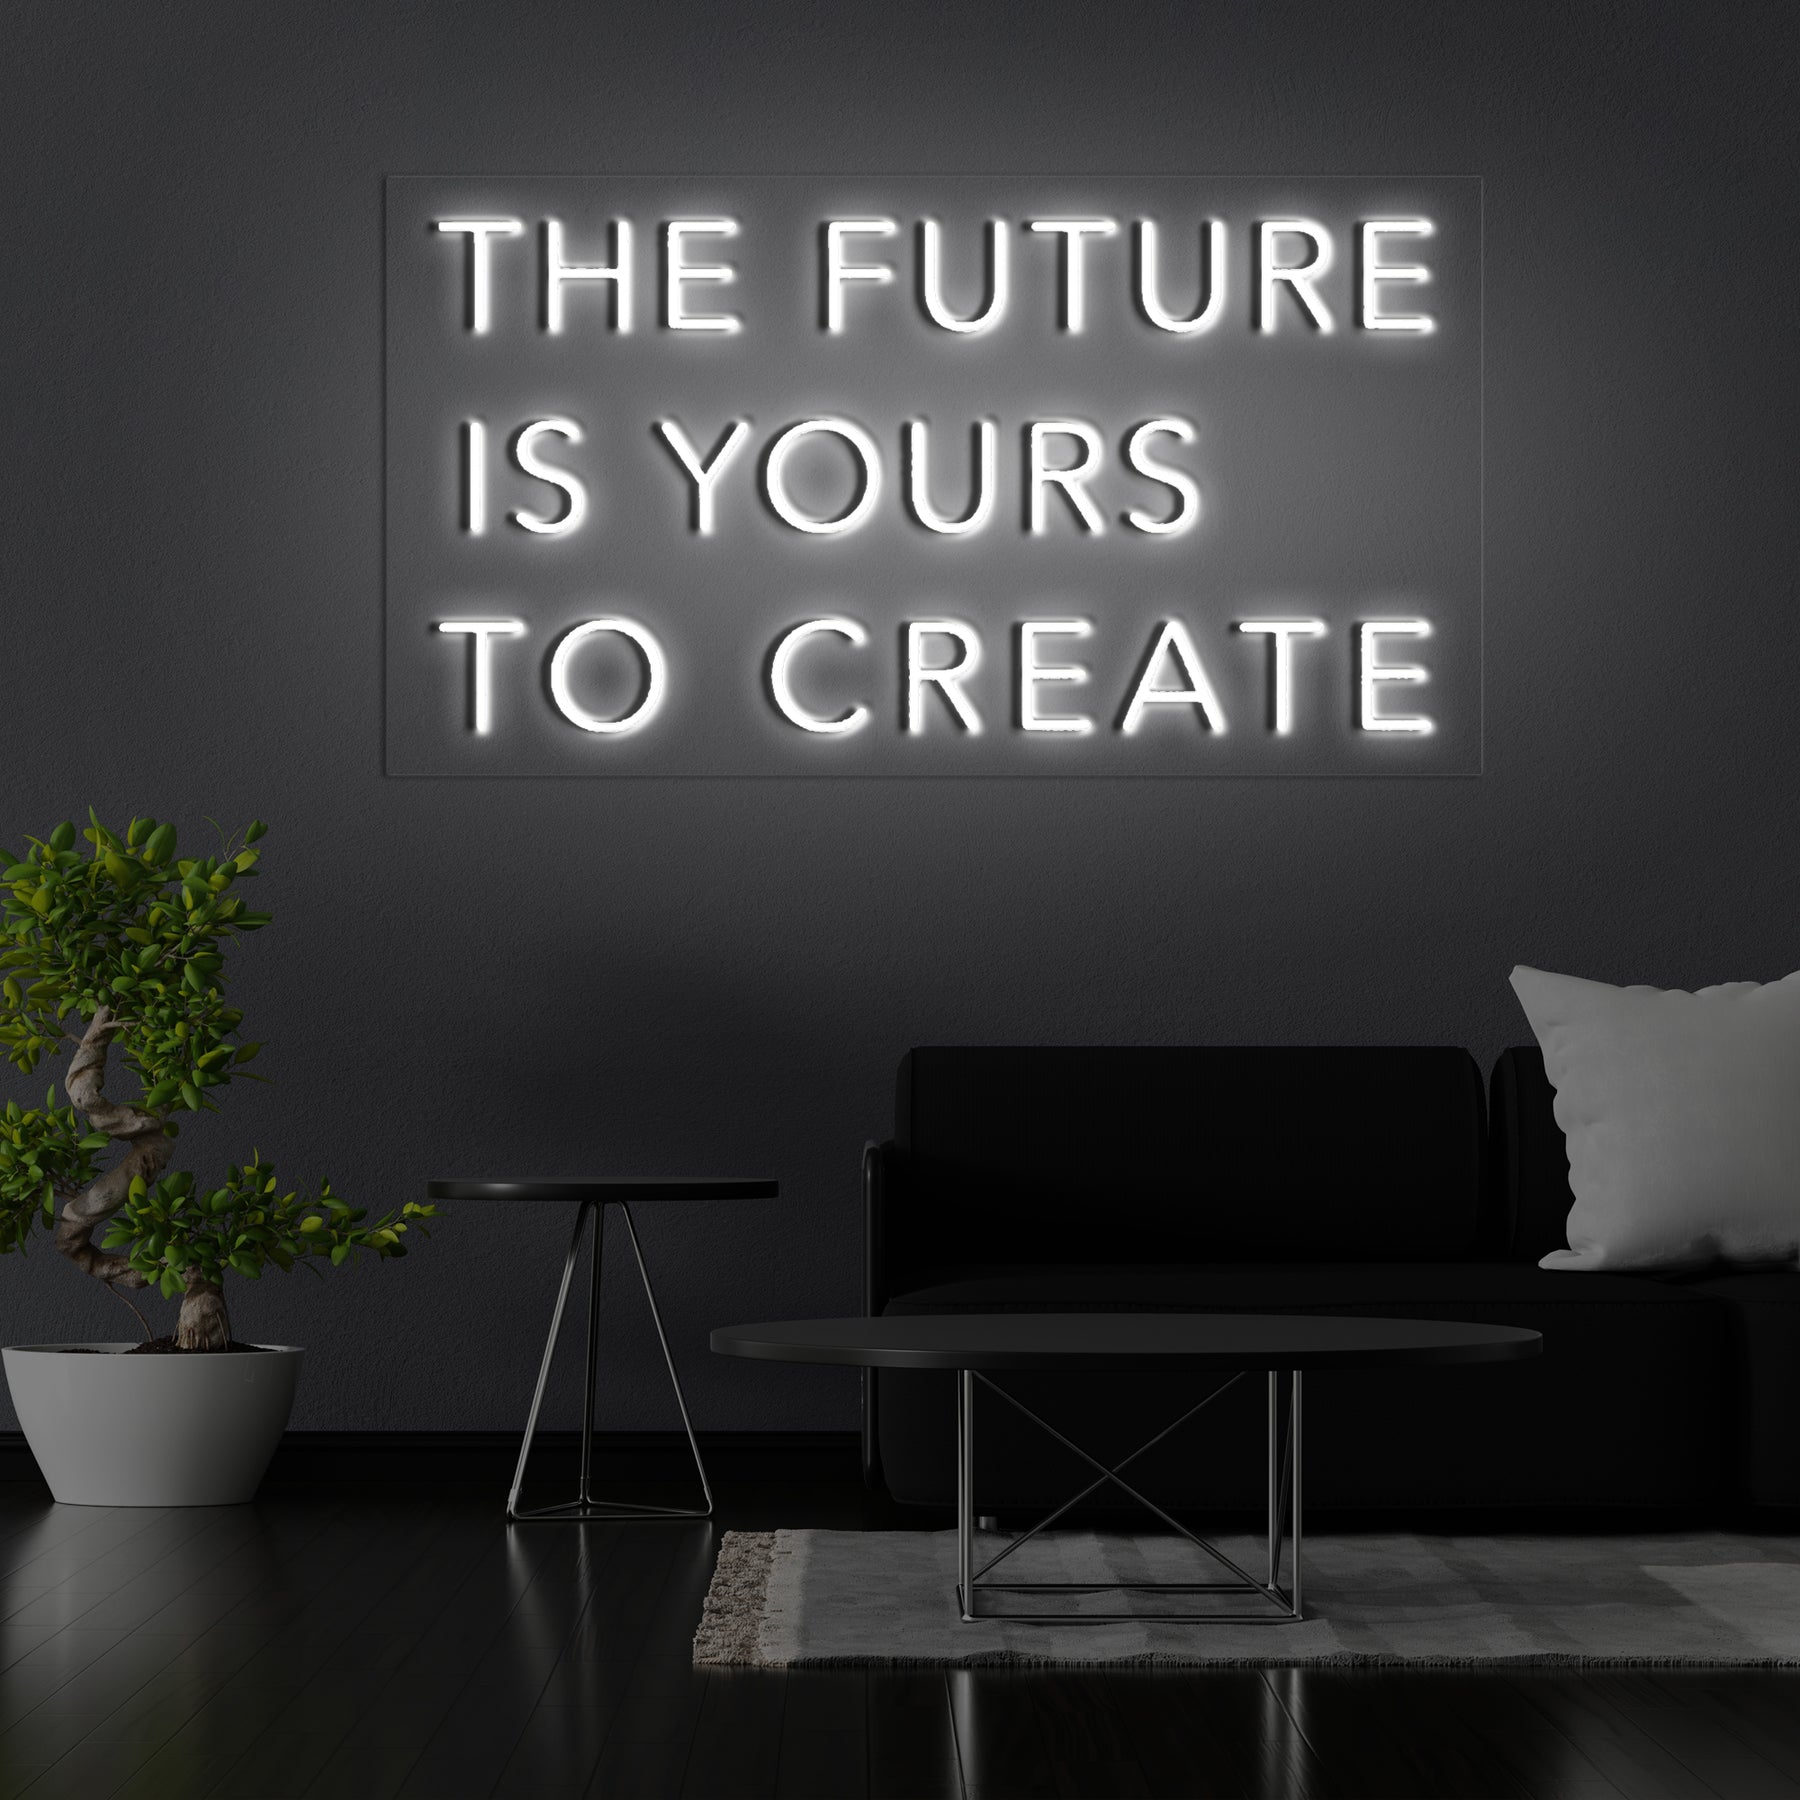 The Future Is Yours to Create